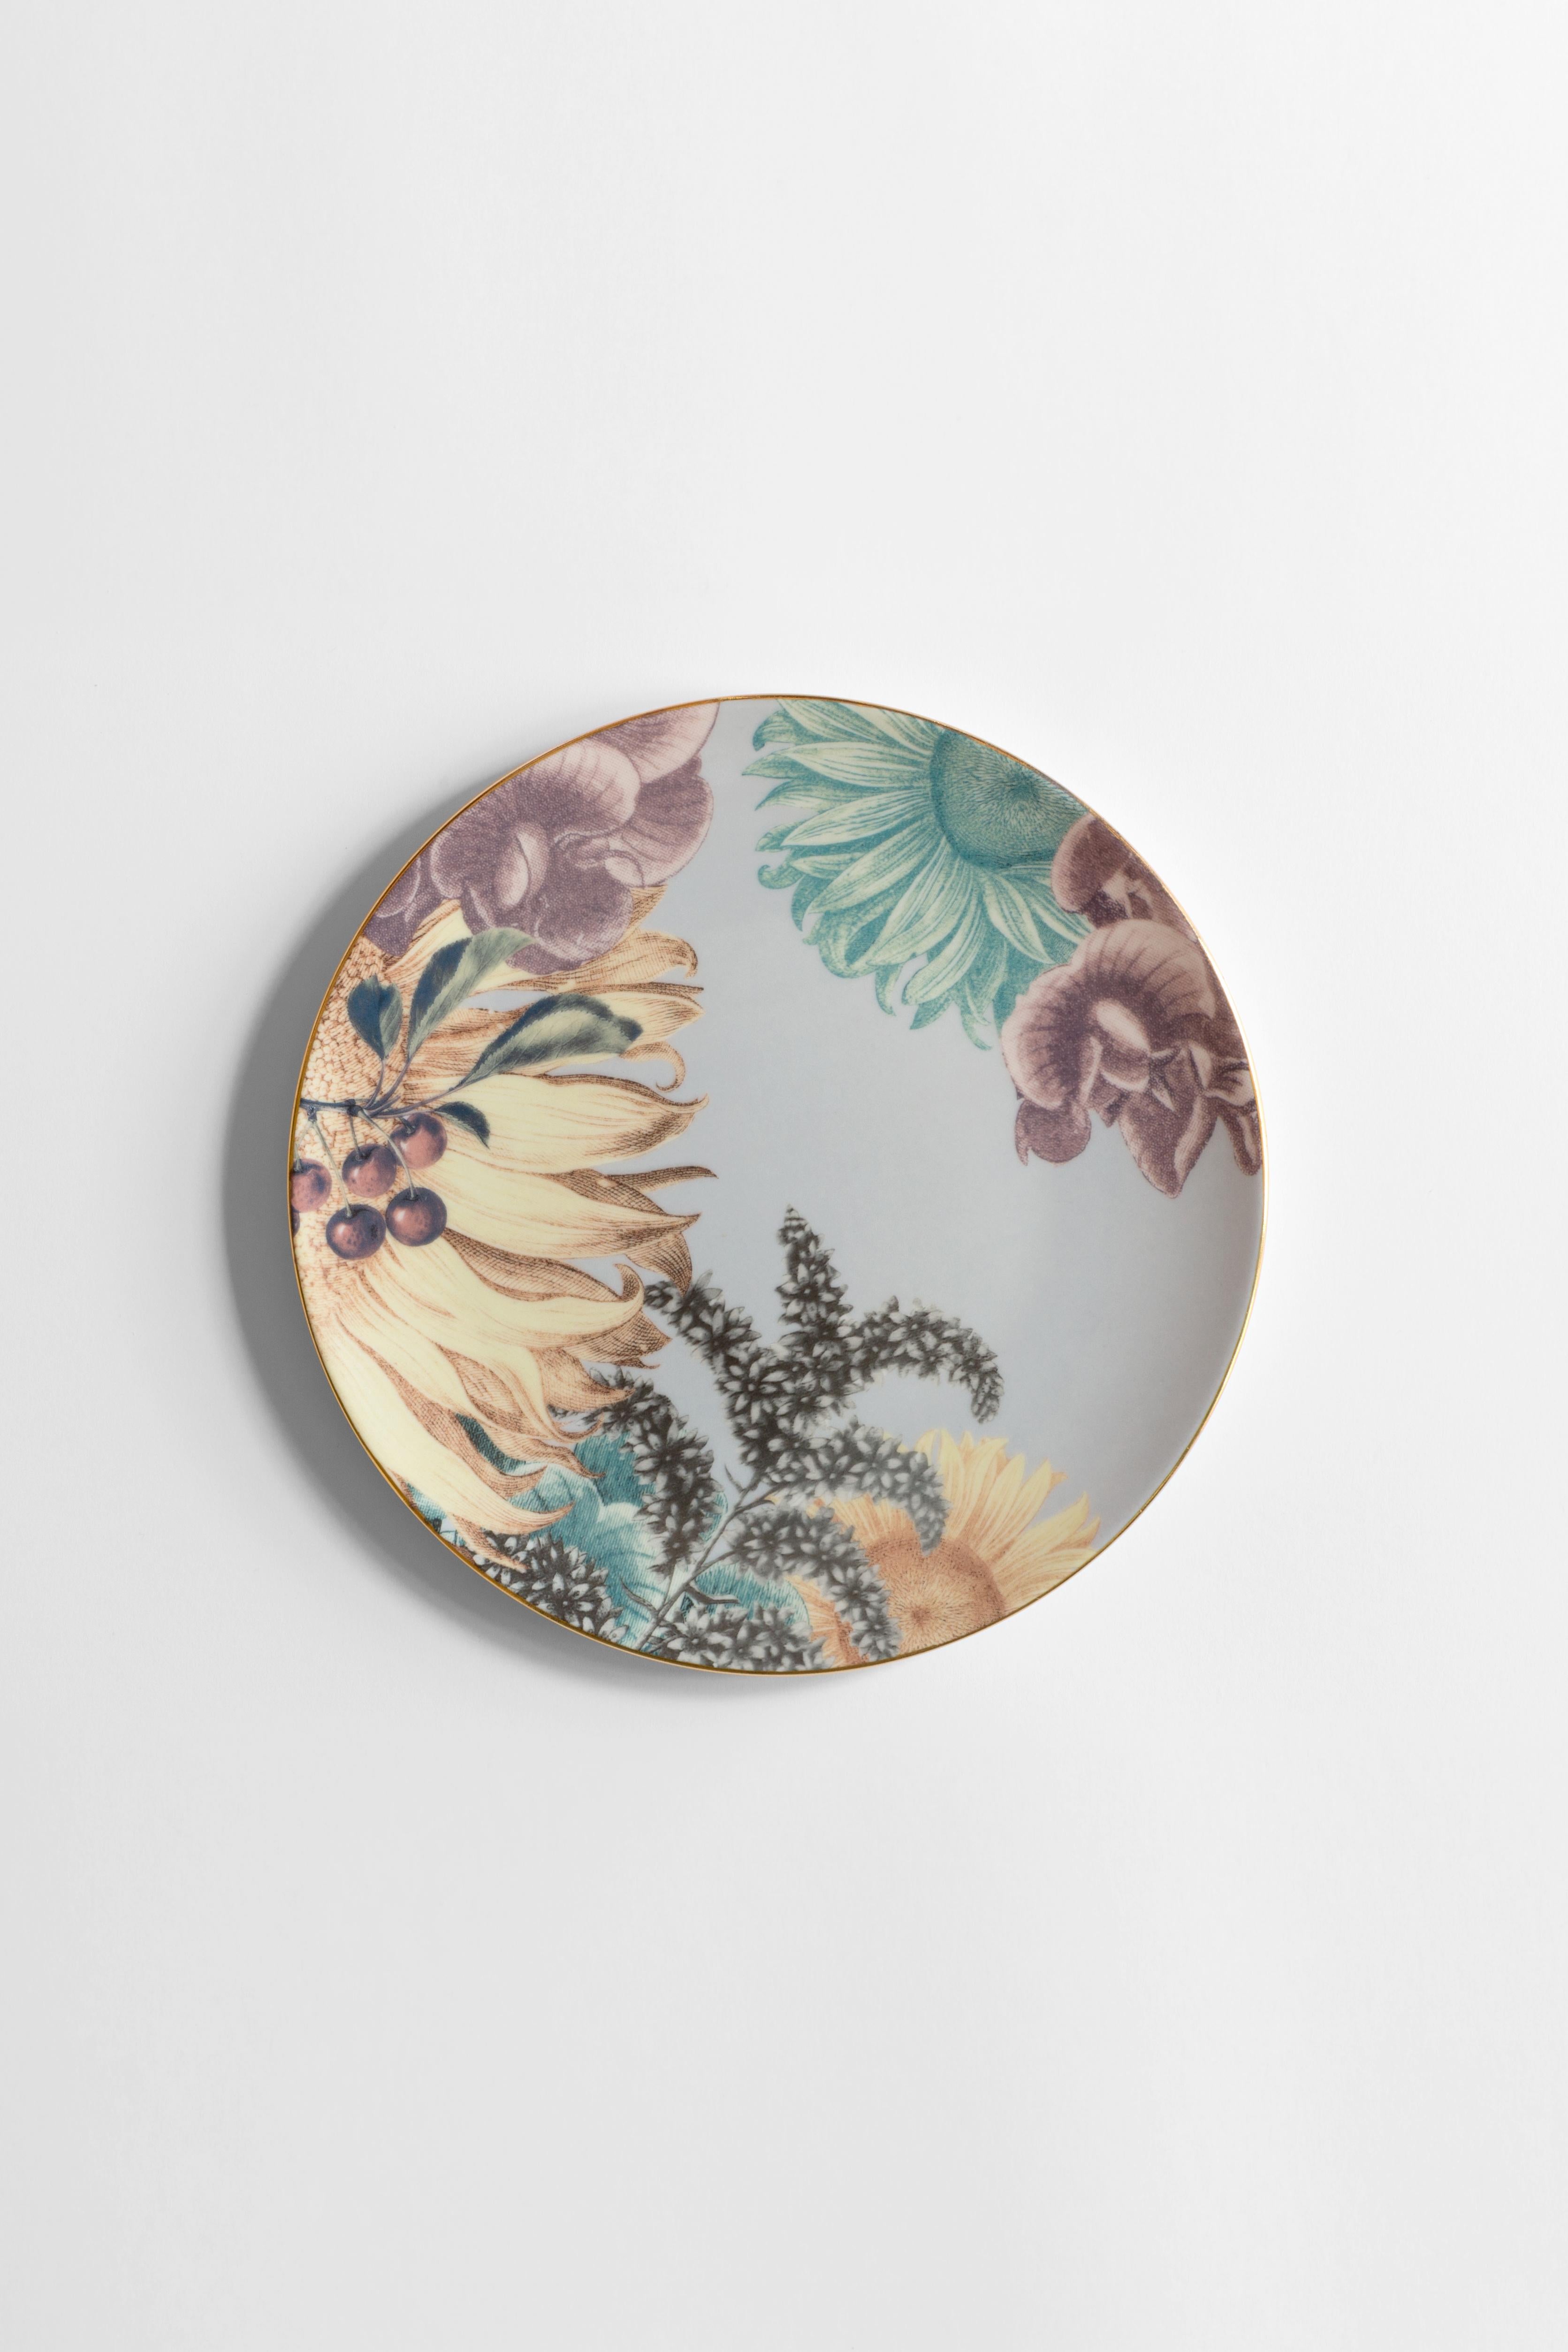 A pensive Berber woman, depicted in black and white while she boasts her traditional headpiece and jewelry with an expression of proud strength on her face, is the protagonist of this dinner plate in porcelain, part of the Cairo collection. All